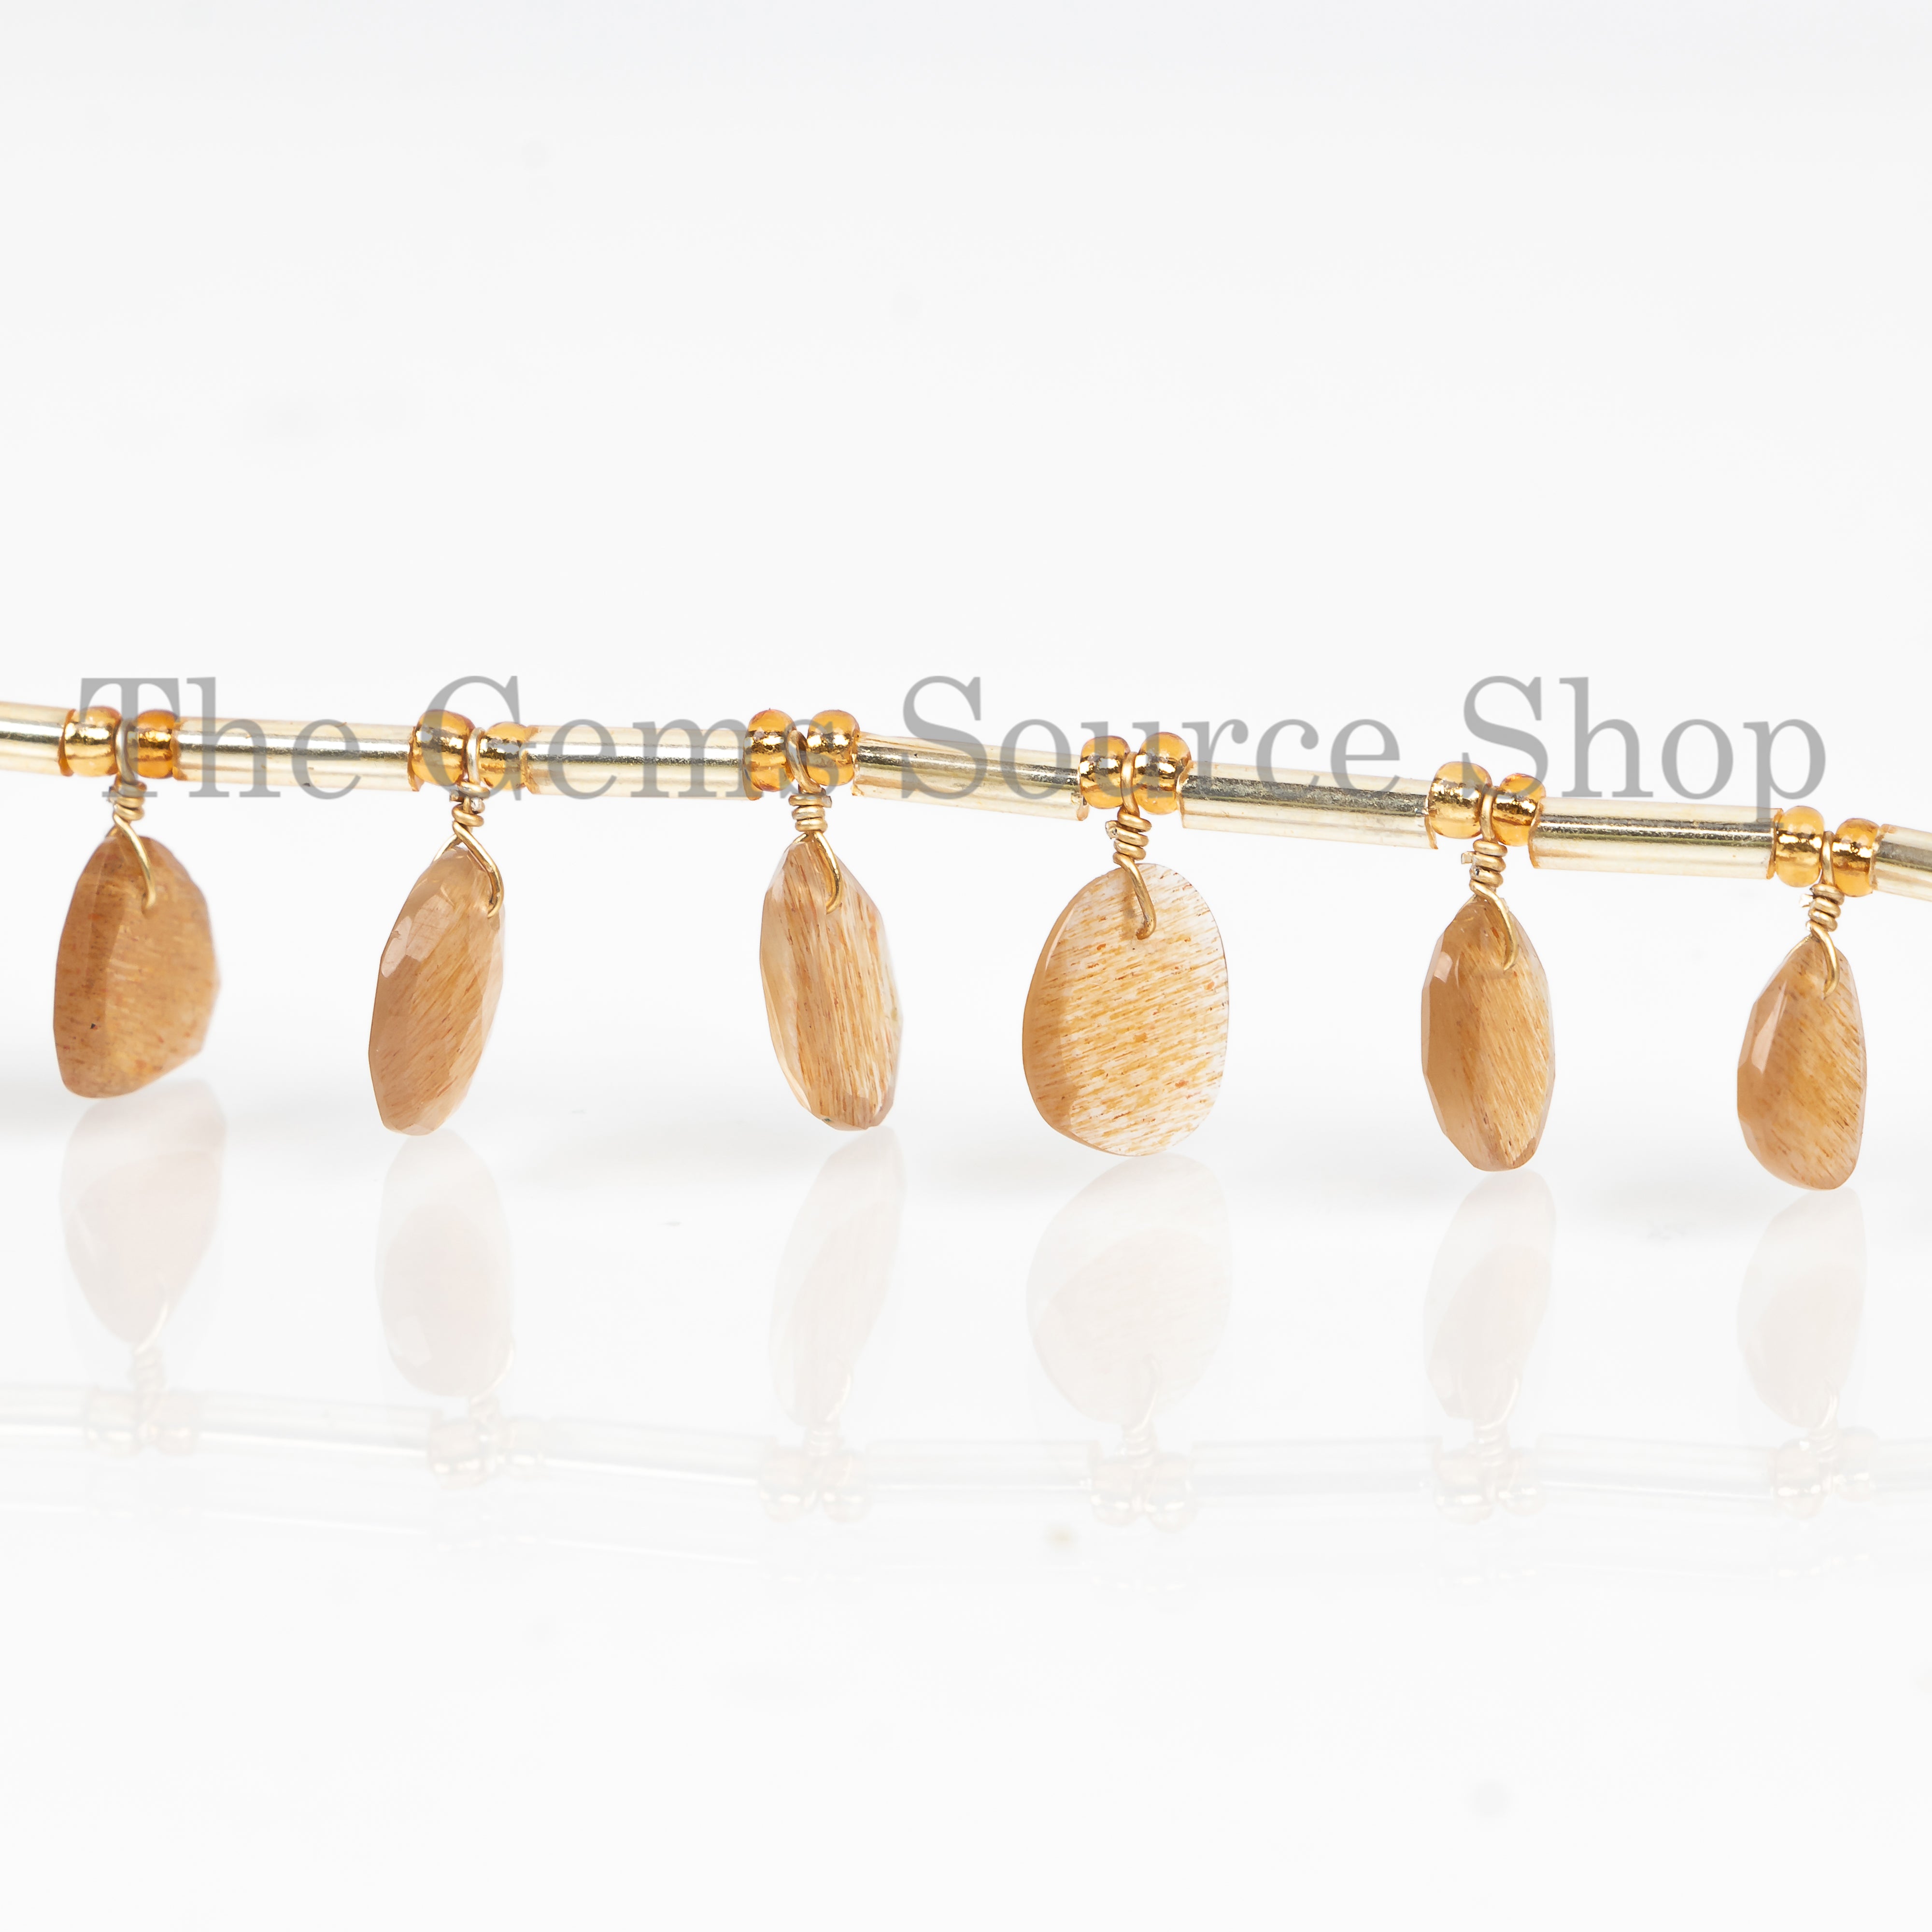 Golden Moonstone Beads, Face Drill Beads, Front to Back Drilled, Rosecut Beads, Fancy Beads, Flat Cabs Faceted Briolette, Moonstone Beads